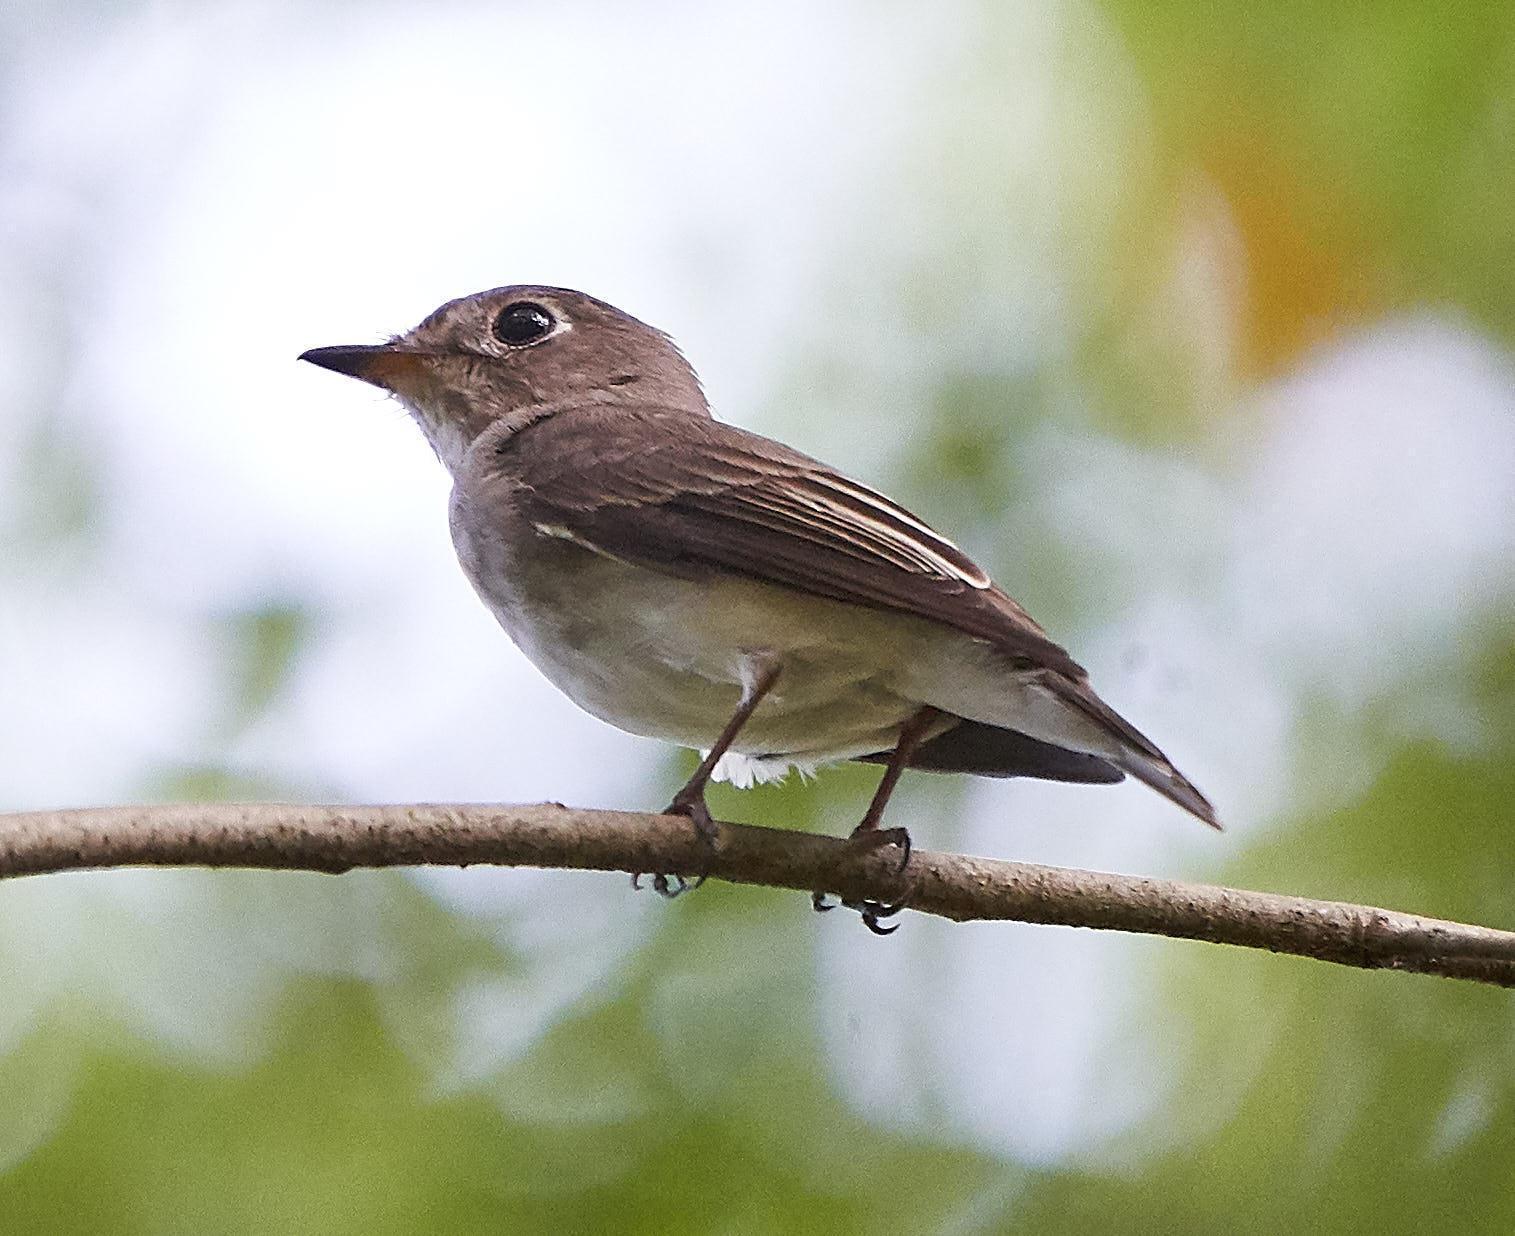 Asian Brown Flycatcher Photo by Steven Cheong